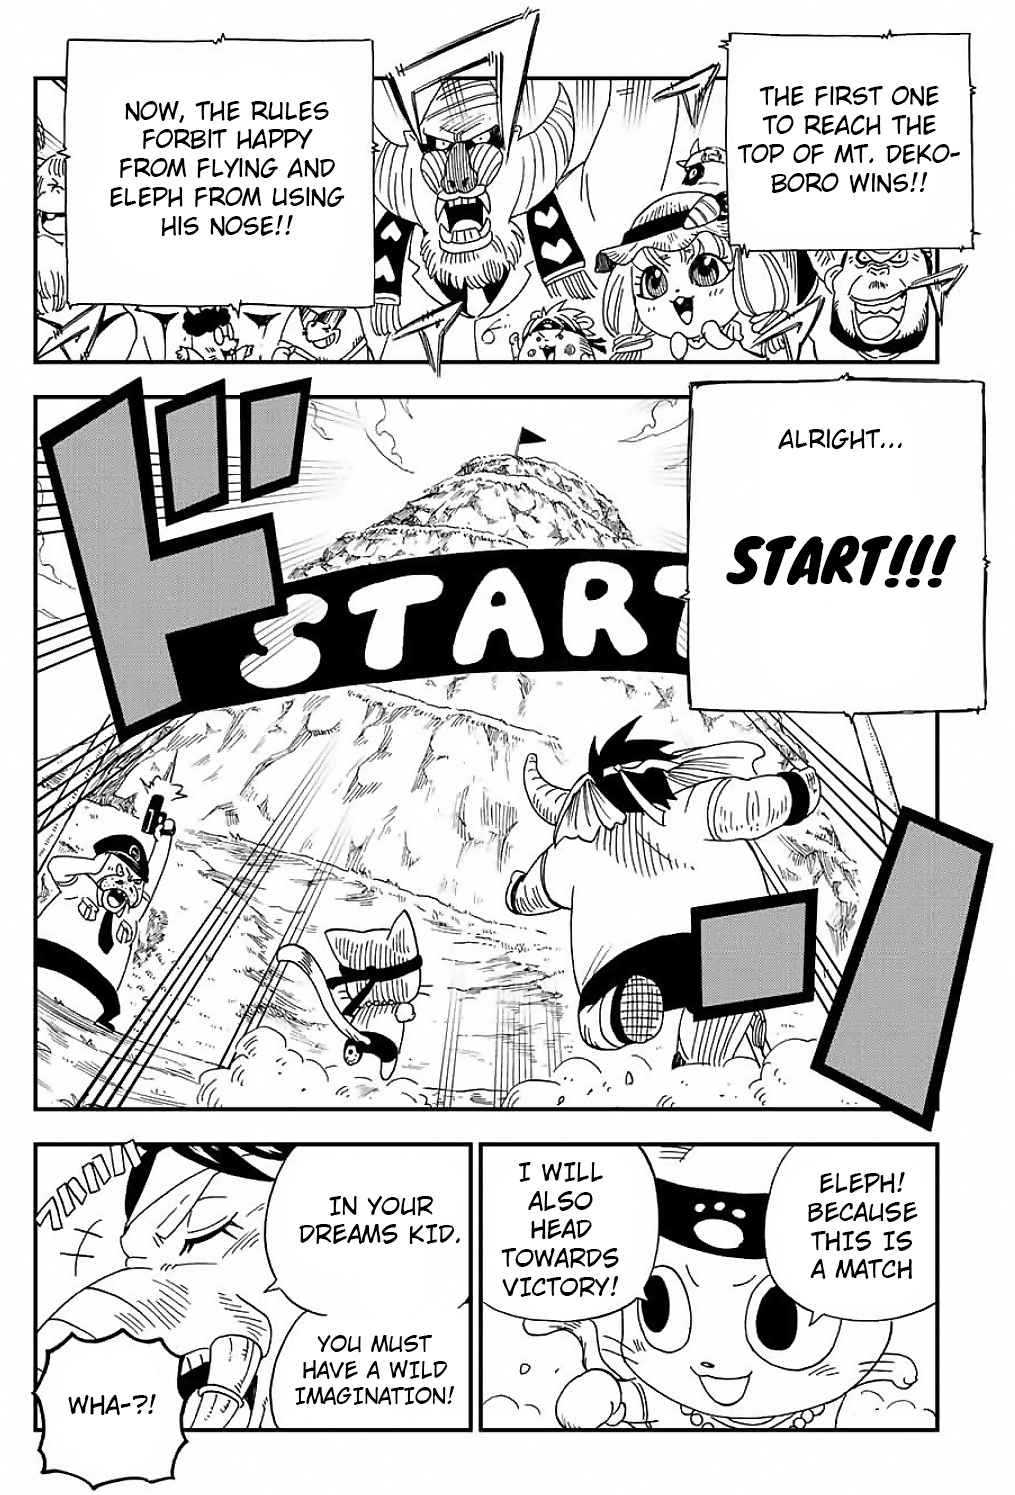 Fairy Tail: Happy's Great Adventure Ch. 9 The Hero Race Begins!!